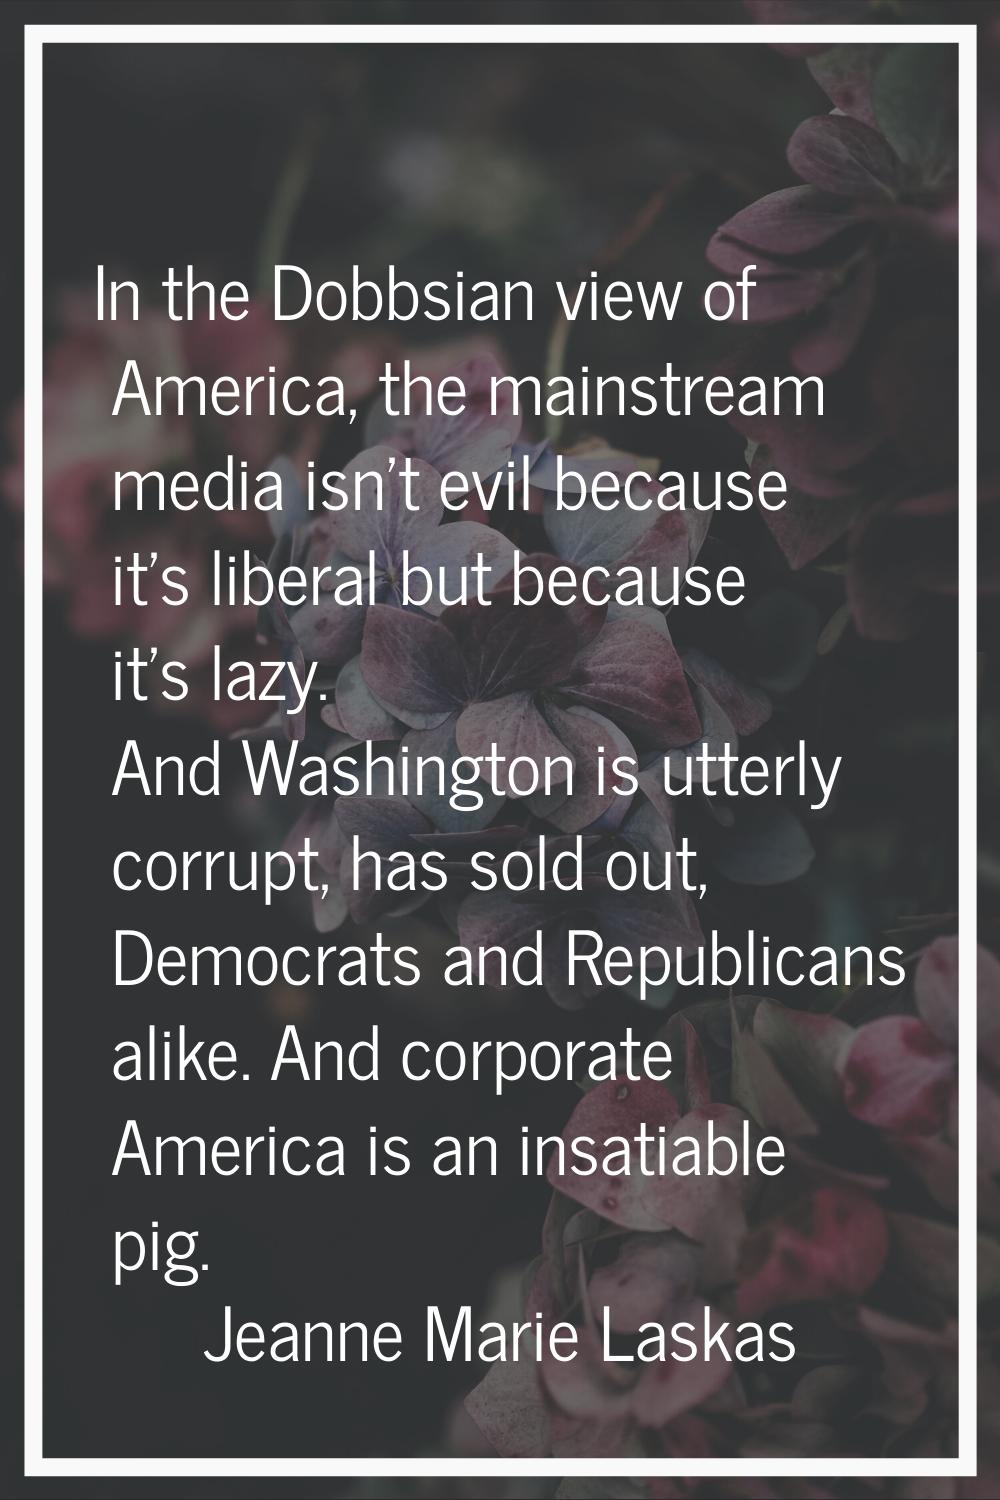 In the Dobbsian view of America, the mainstream media isn't evil because it's liberal but because i